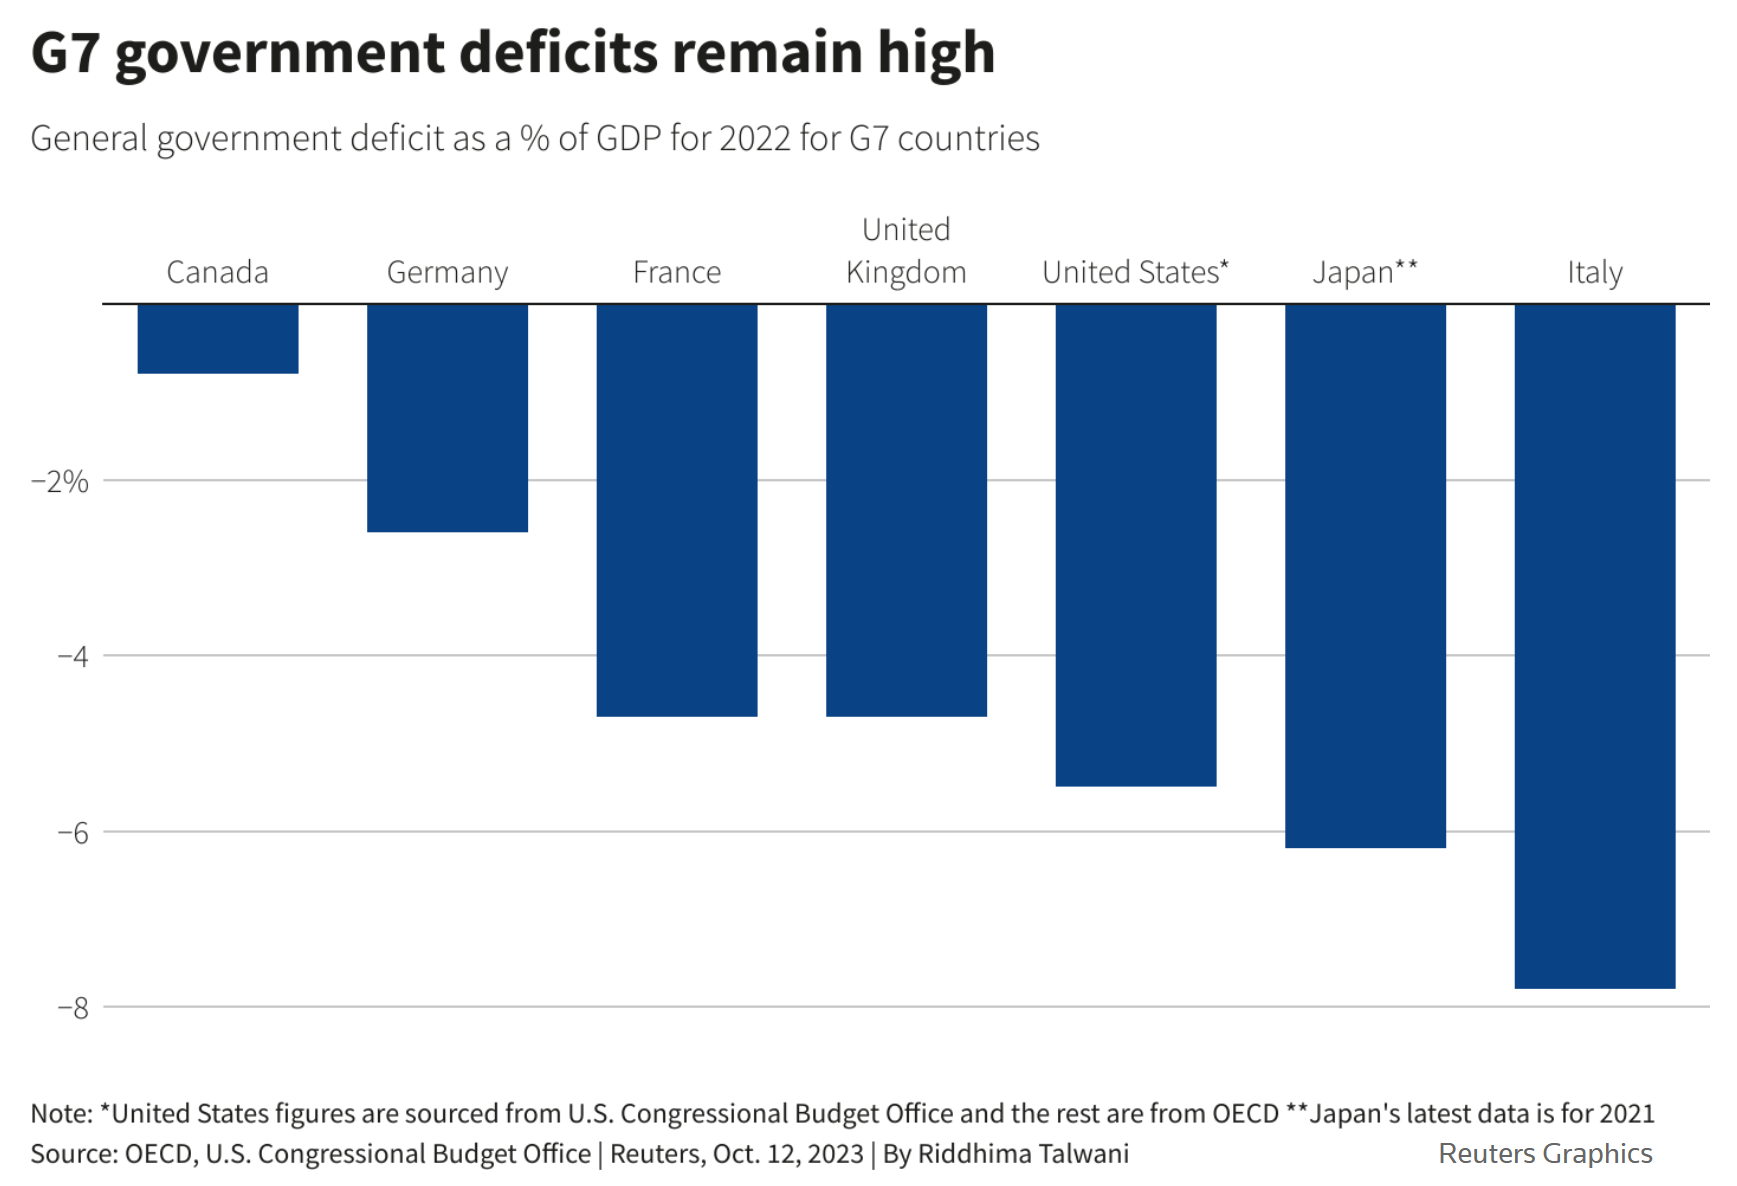 General government deficit of G7 countries in 2022 as a percentage of GDP.  Data: OECD / U.S. Congressional Budget Office. Graphic: Riddhima Talwani / Reuters